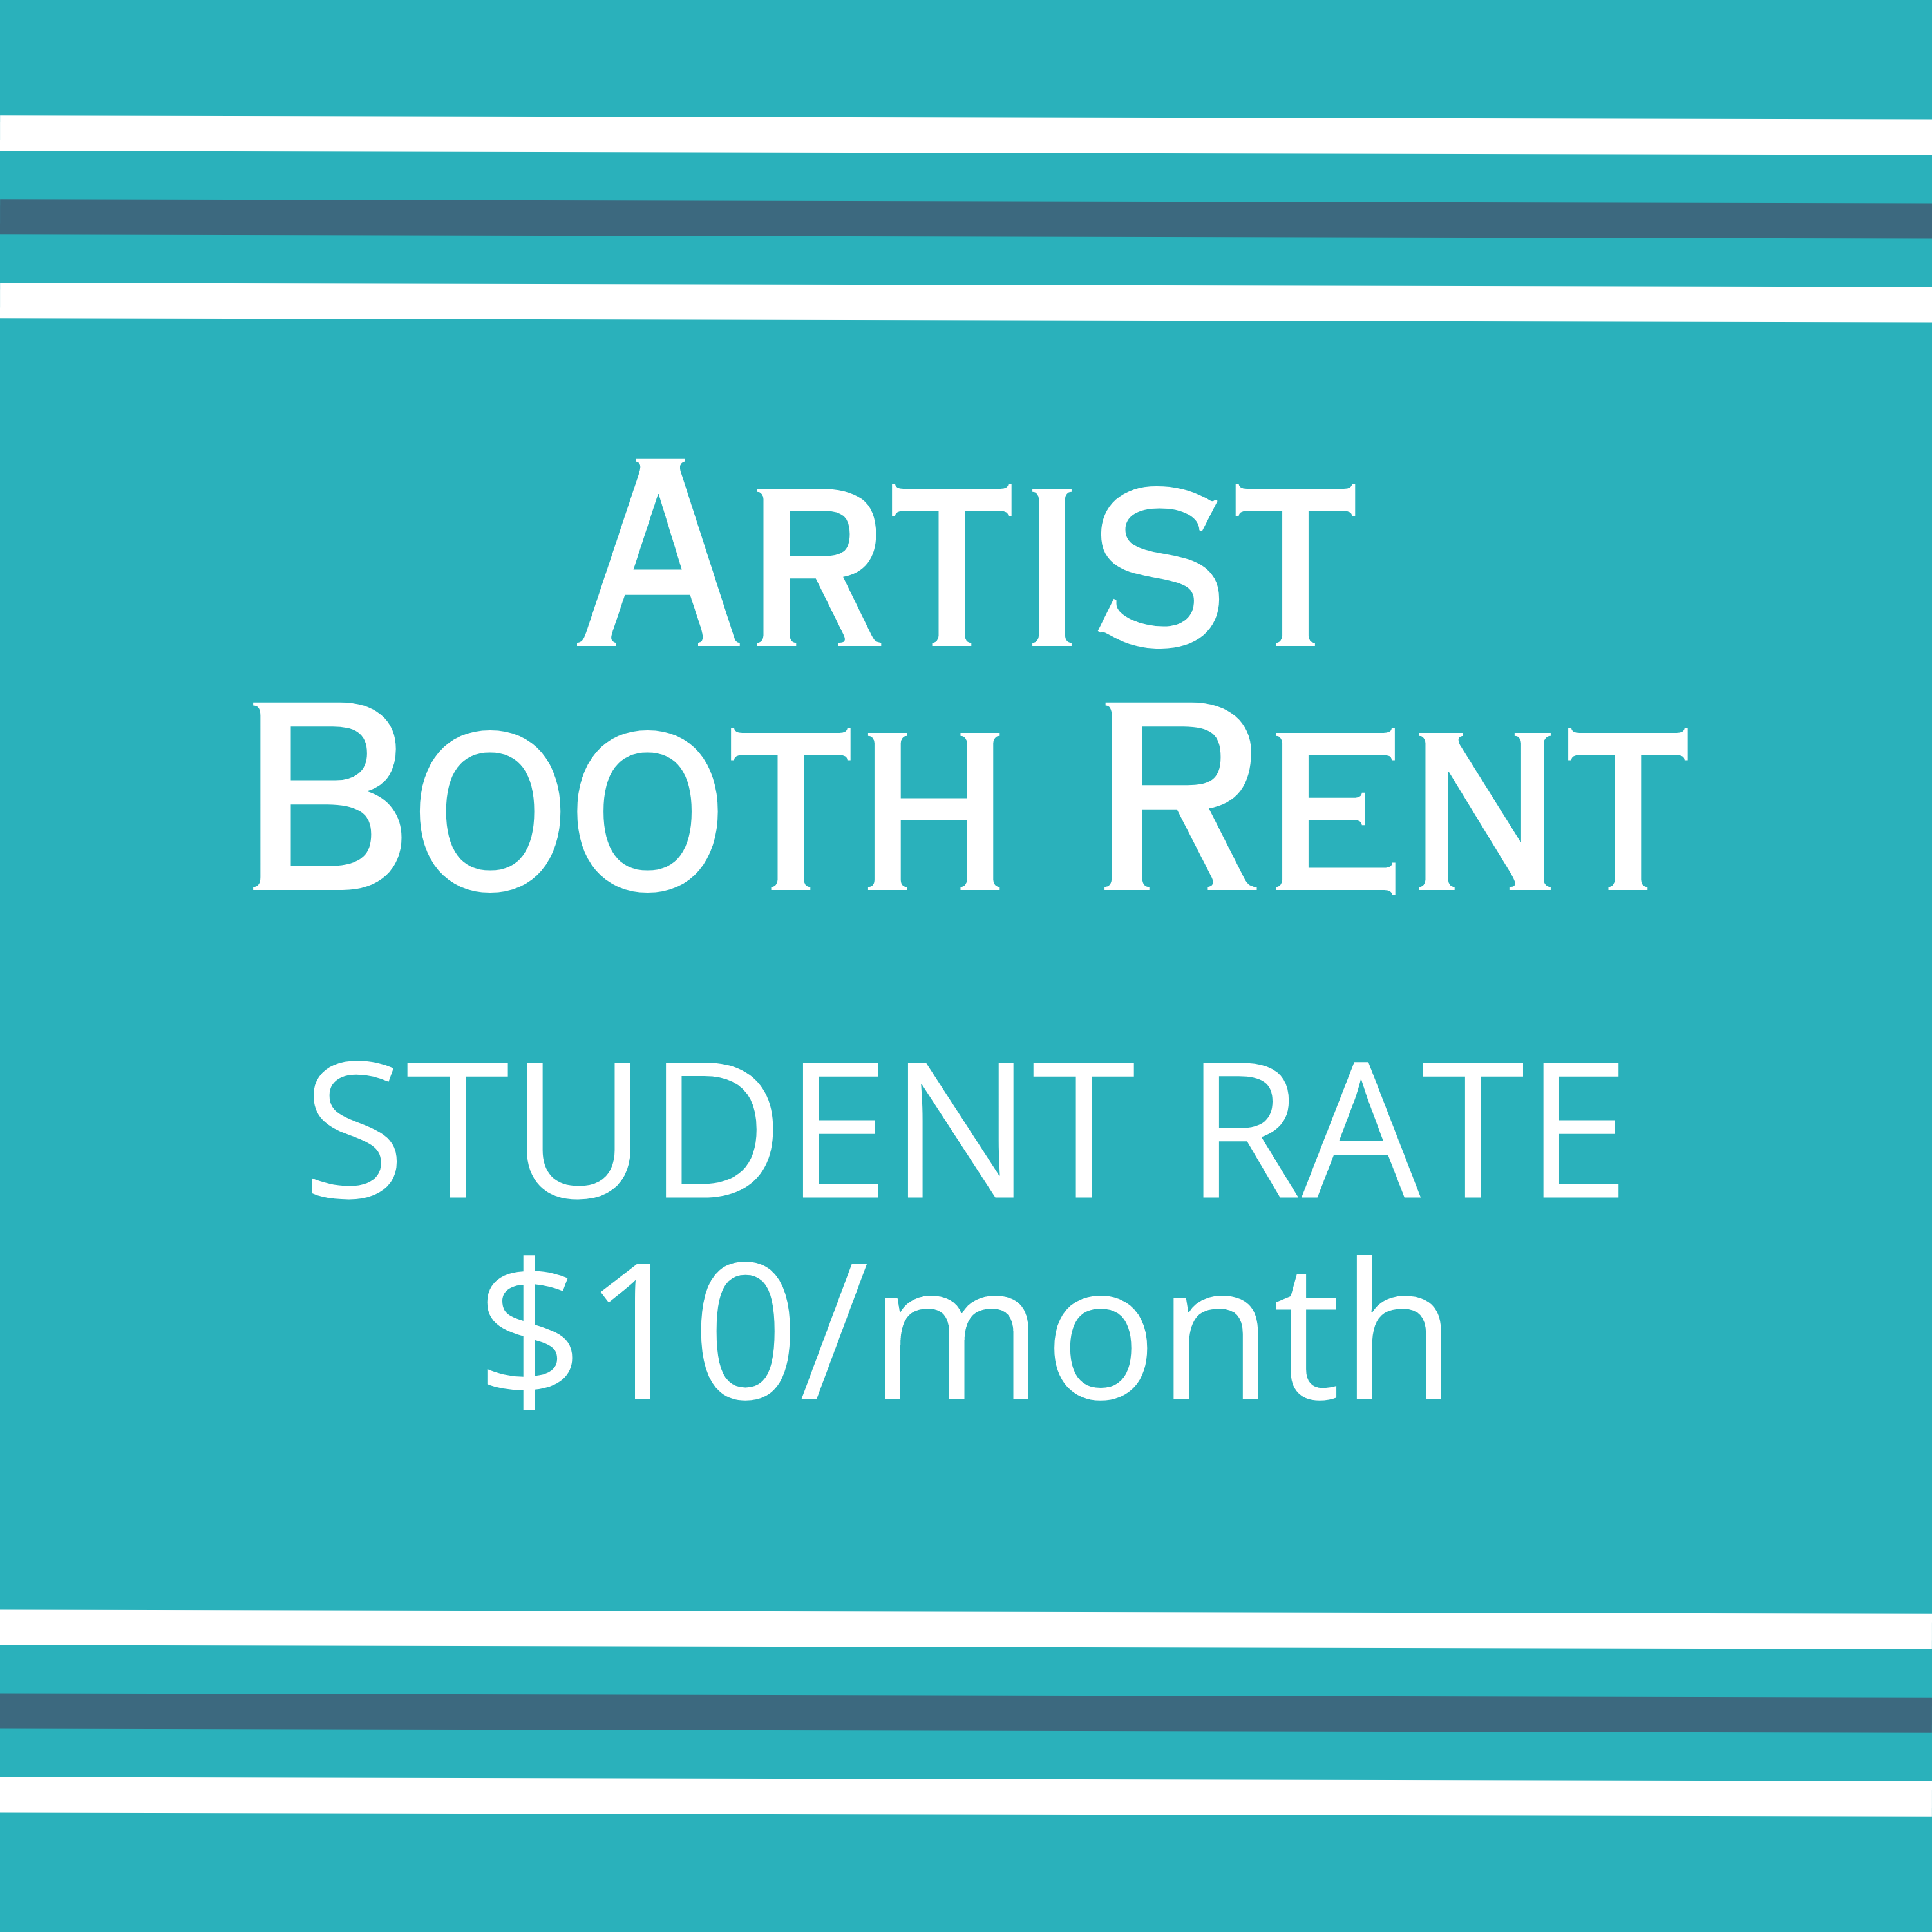 Booth Rental - Student Rate $10